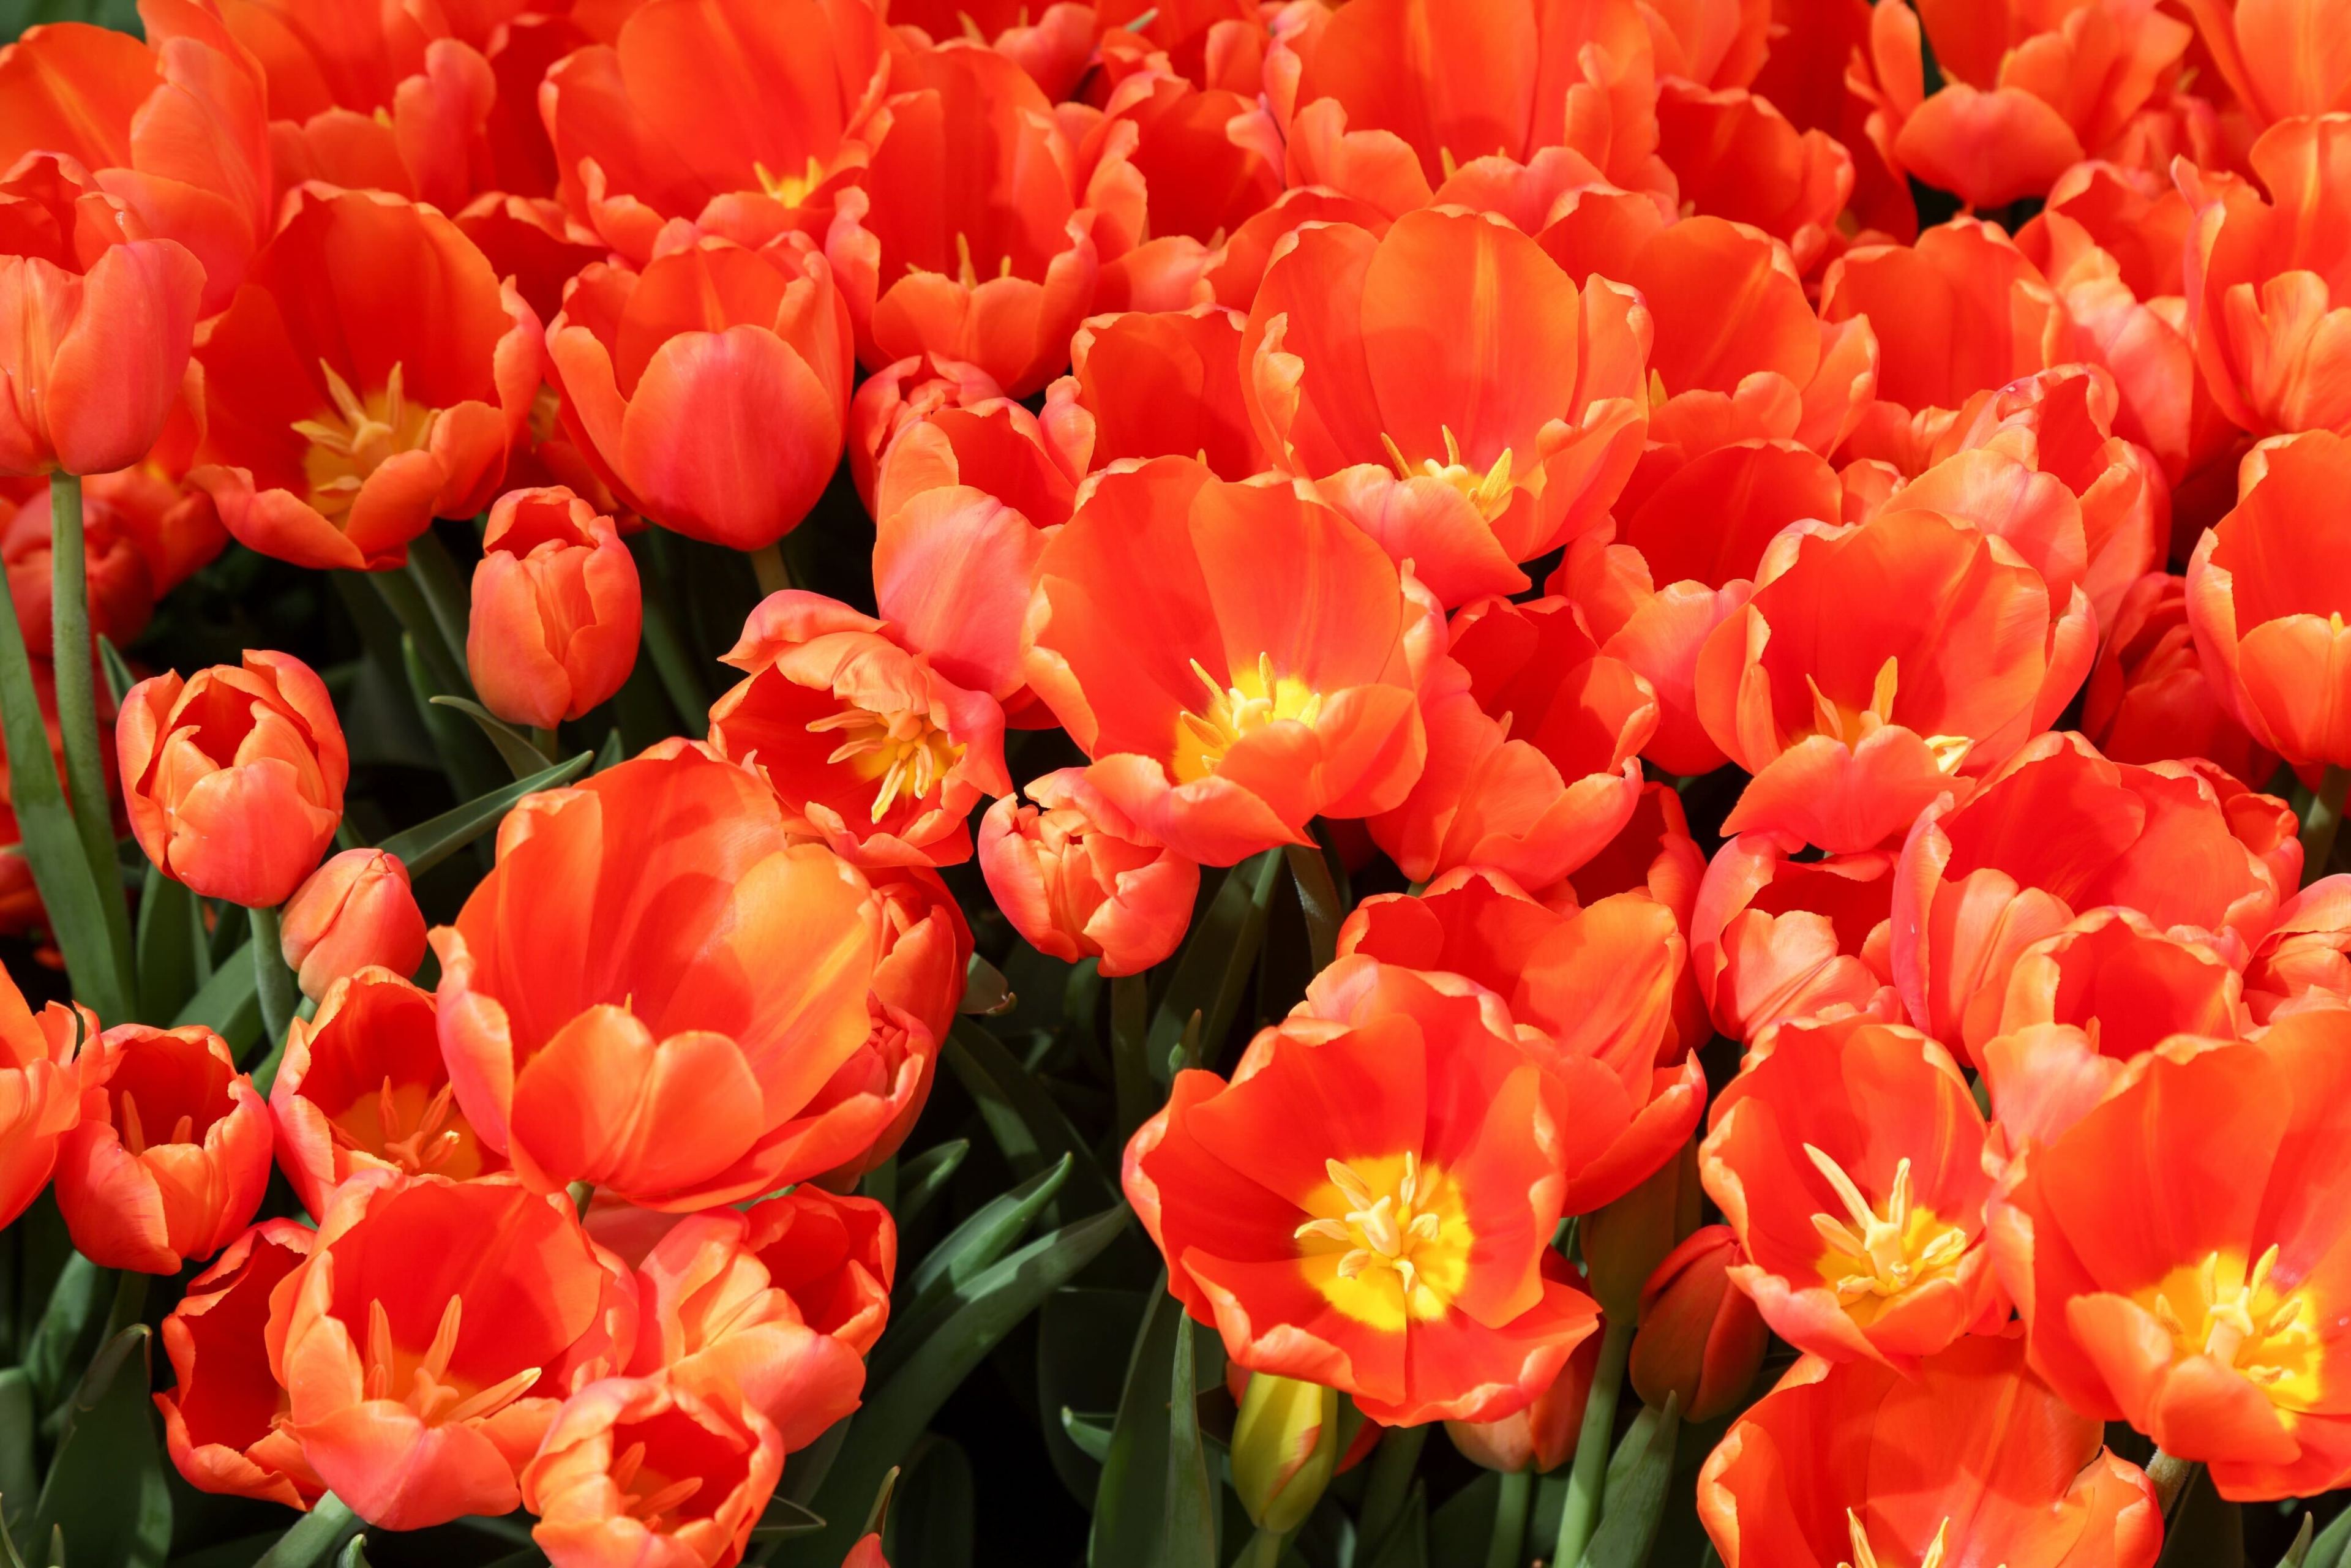 A vibrant cluster of orange tulips in full bloom, closely packed together.